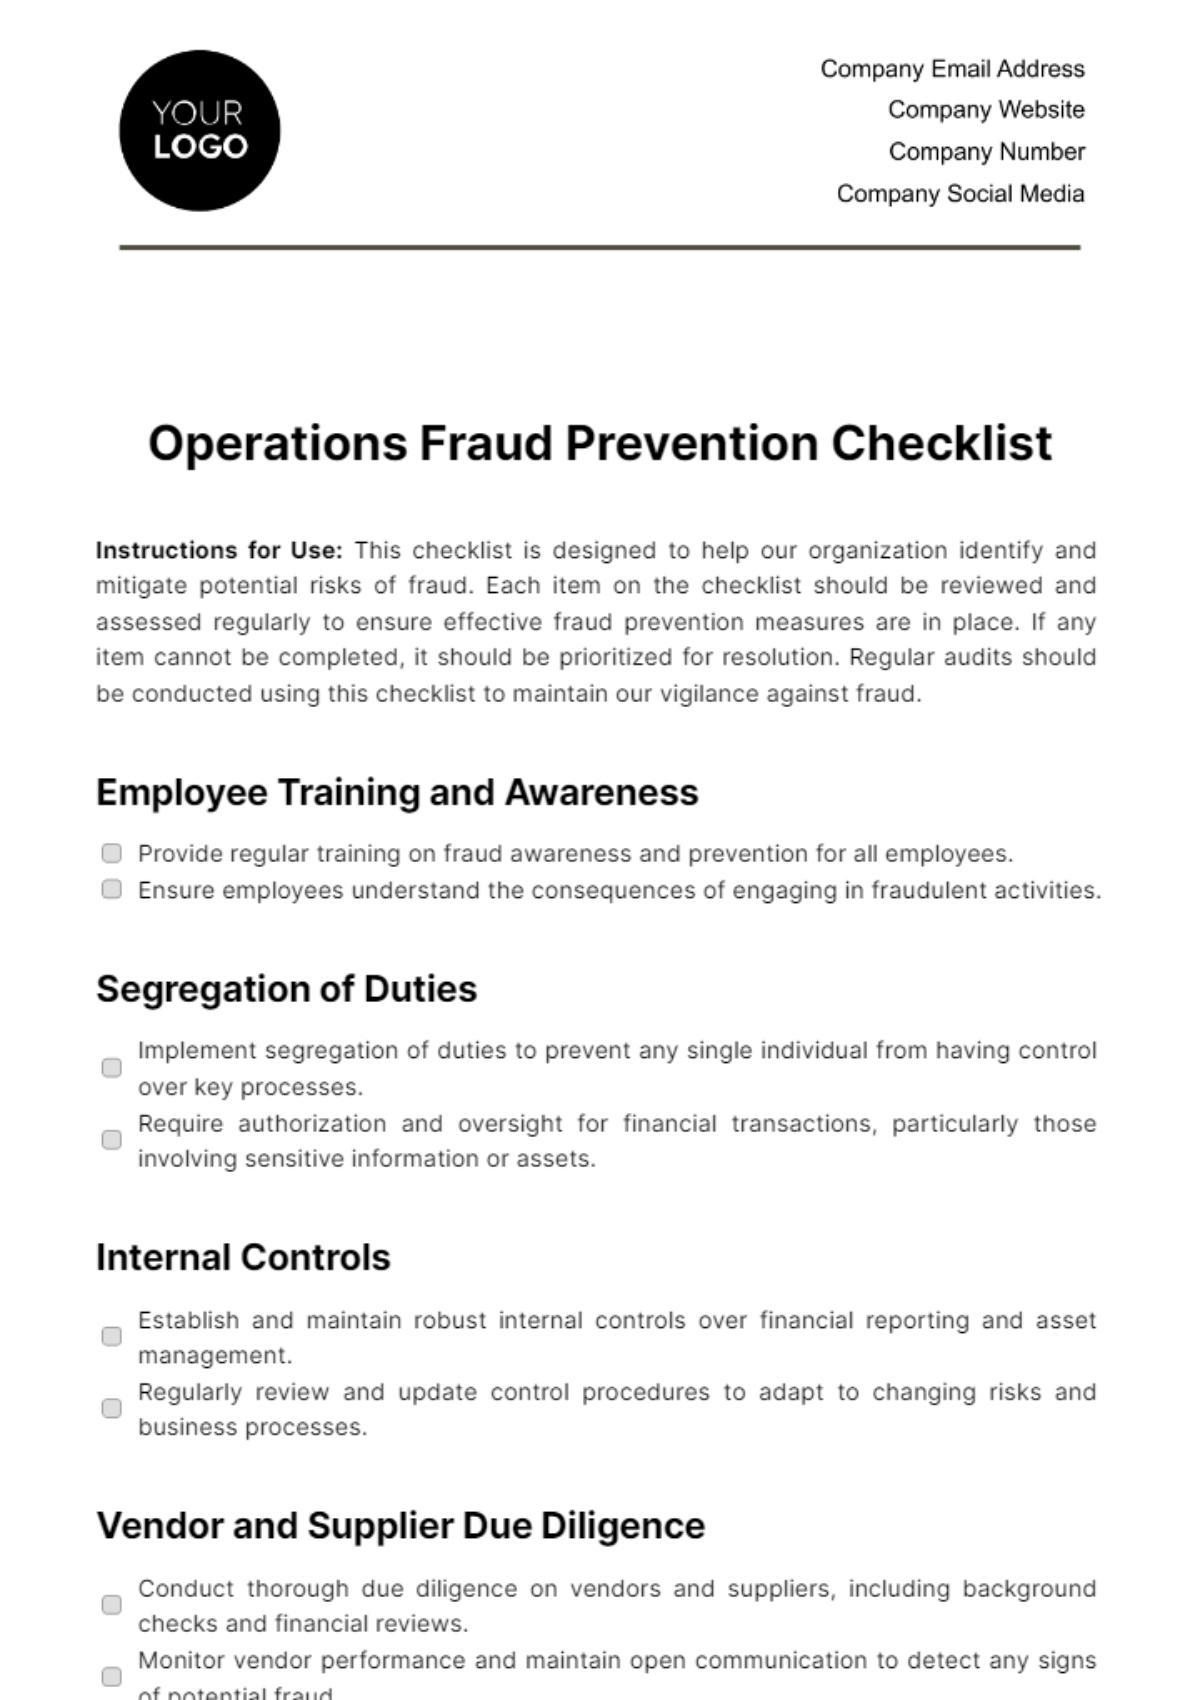 Free Operations Fraud Prevention Checklist Template